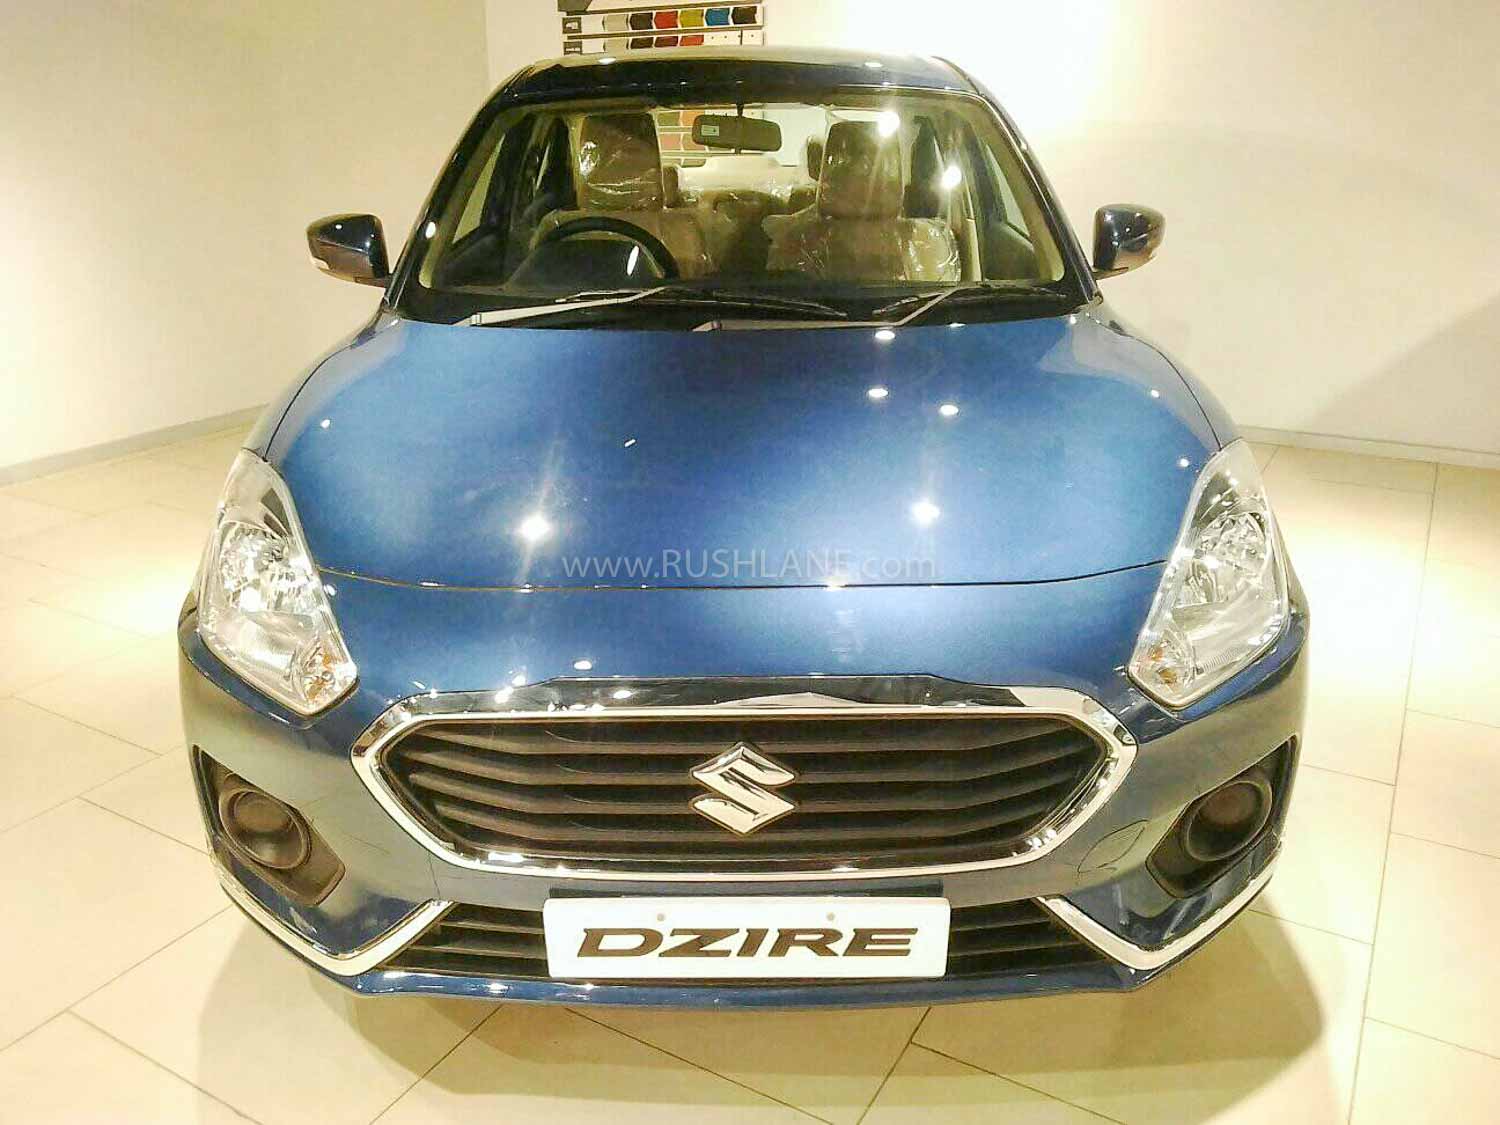 Top 25 best selling cars January 2020 - Maruti Dzire is No 1